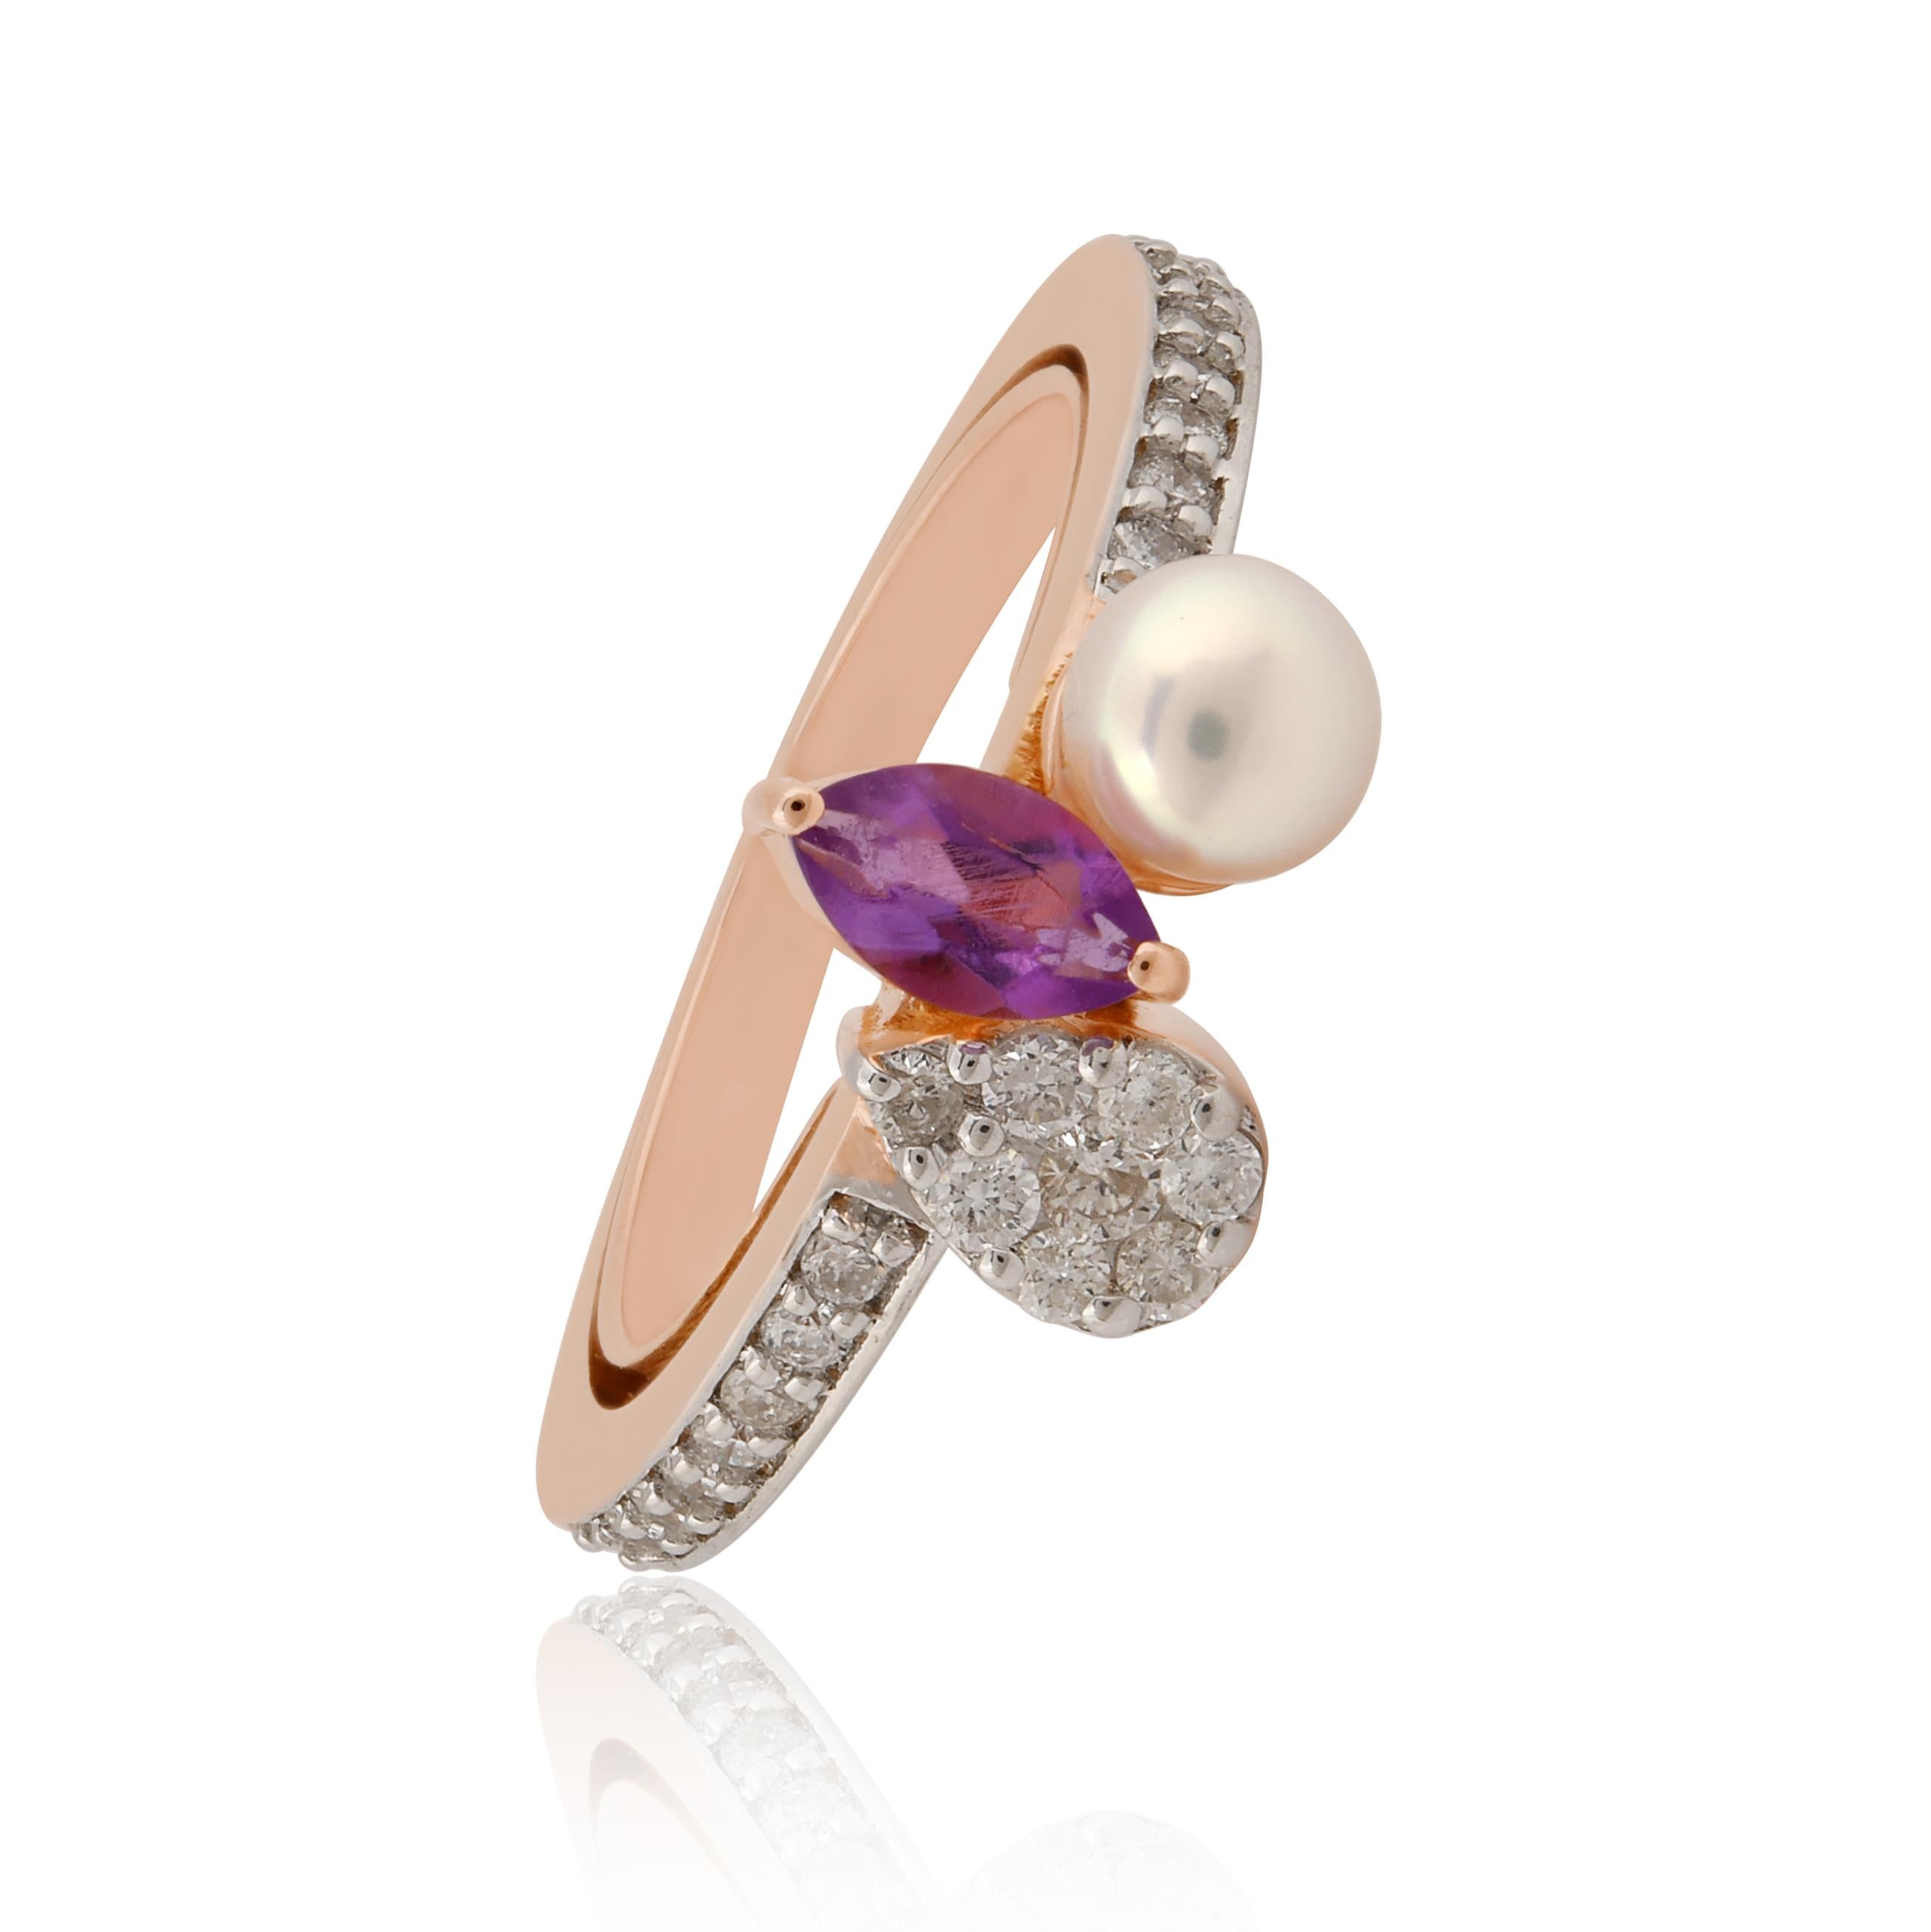 For Sale:  Marquise Amethyst Pearl Ring SI Clarity HI Color Diamond 18k Rose Gold Jewelry 3